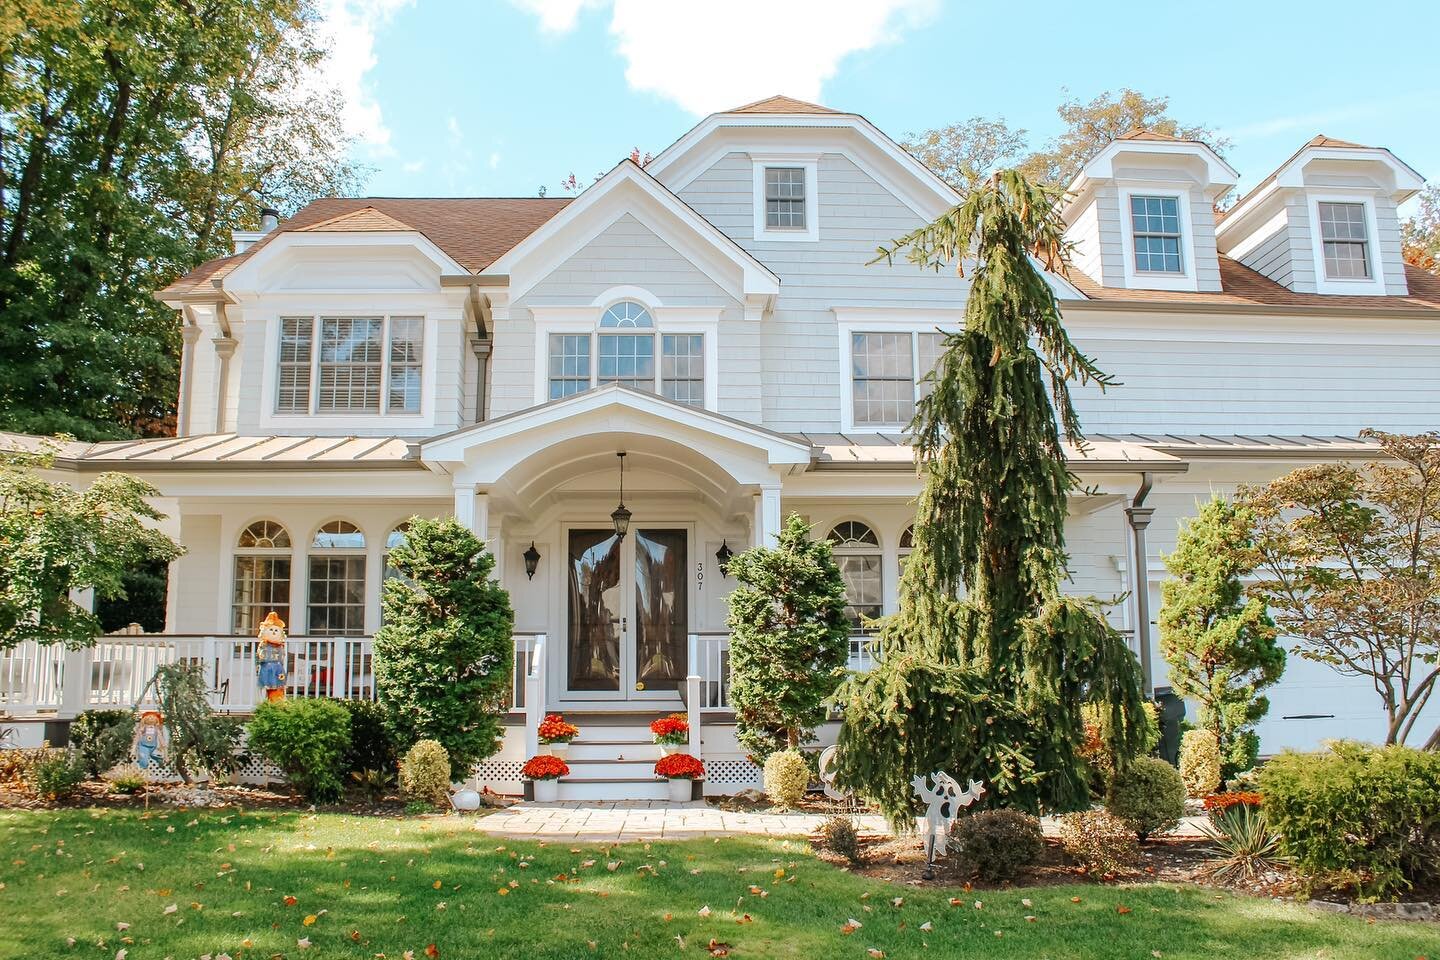 A fall time favorite 🍂What do you think about this wrap around porch/main entrance makeover? 

📍Westfield, NJ
💫Our Suppliers : 
@cavallari.gutters
@azekexteriors
@theazekcompany
@buildersgeneral
@andersen_windows 
@timbertech
.
.
.
#nj #westfieldn